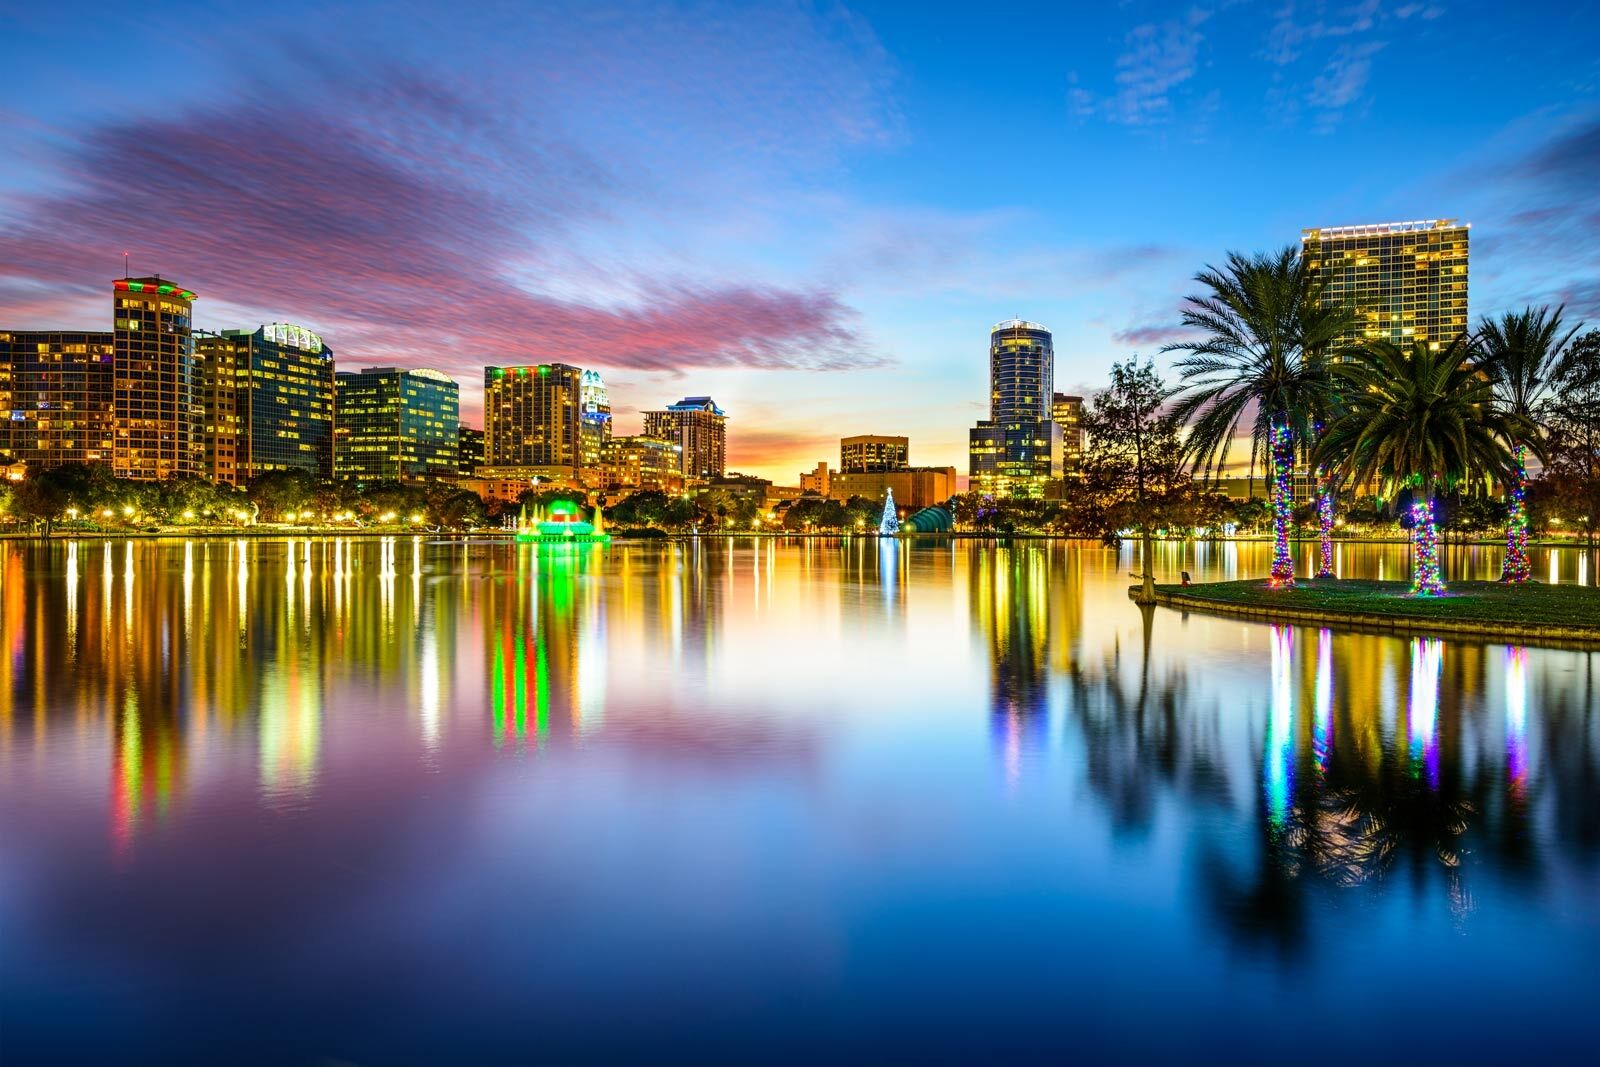 Things to do in Orlando Florida